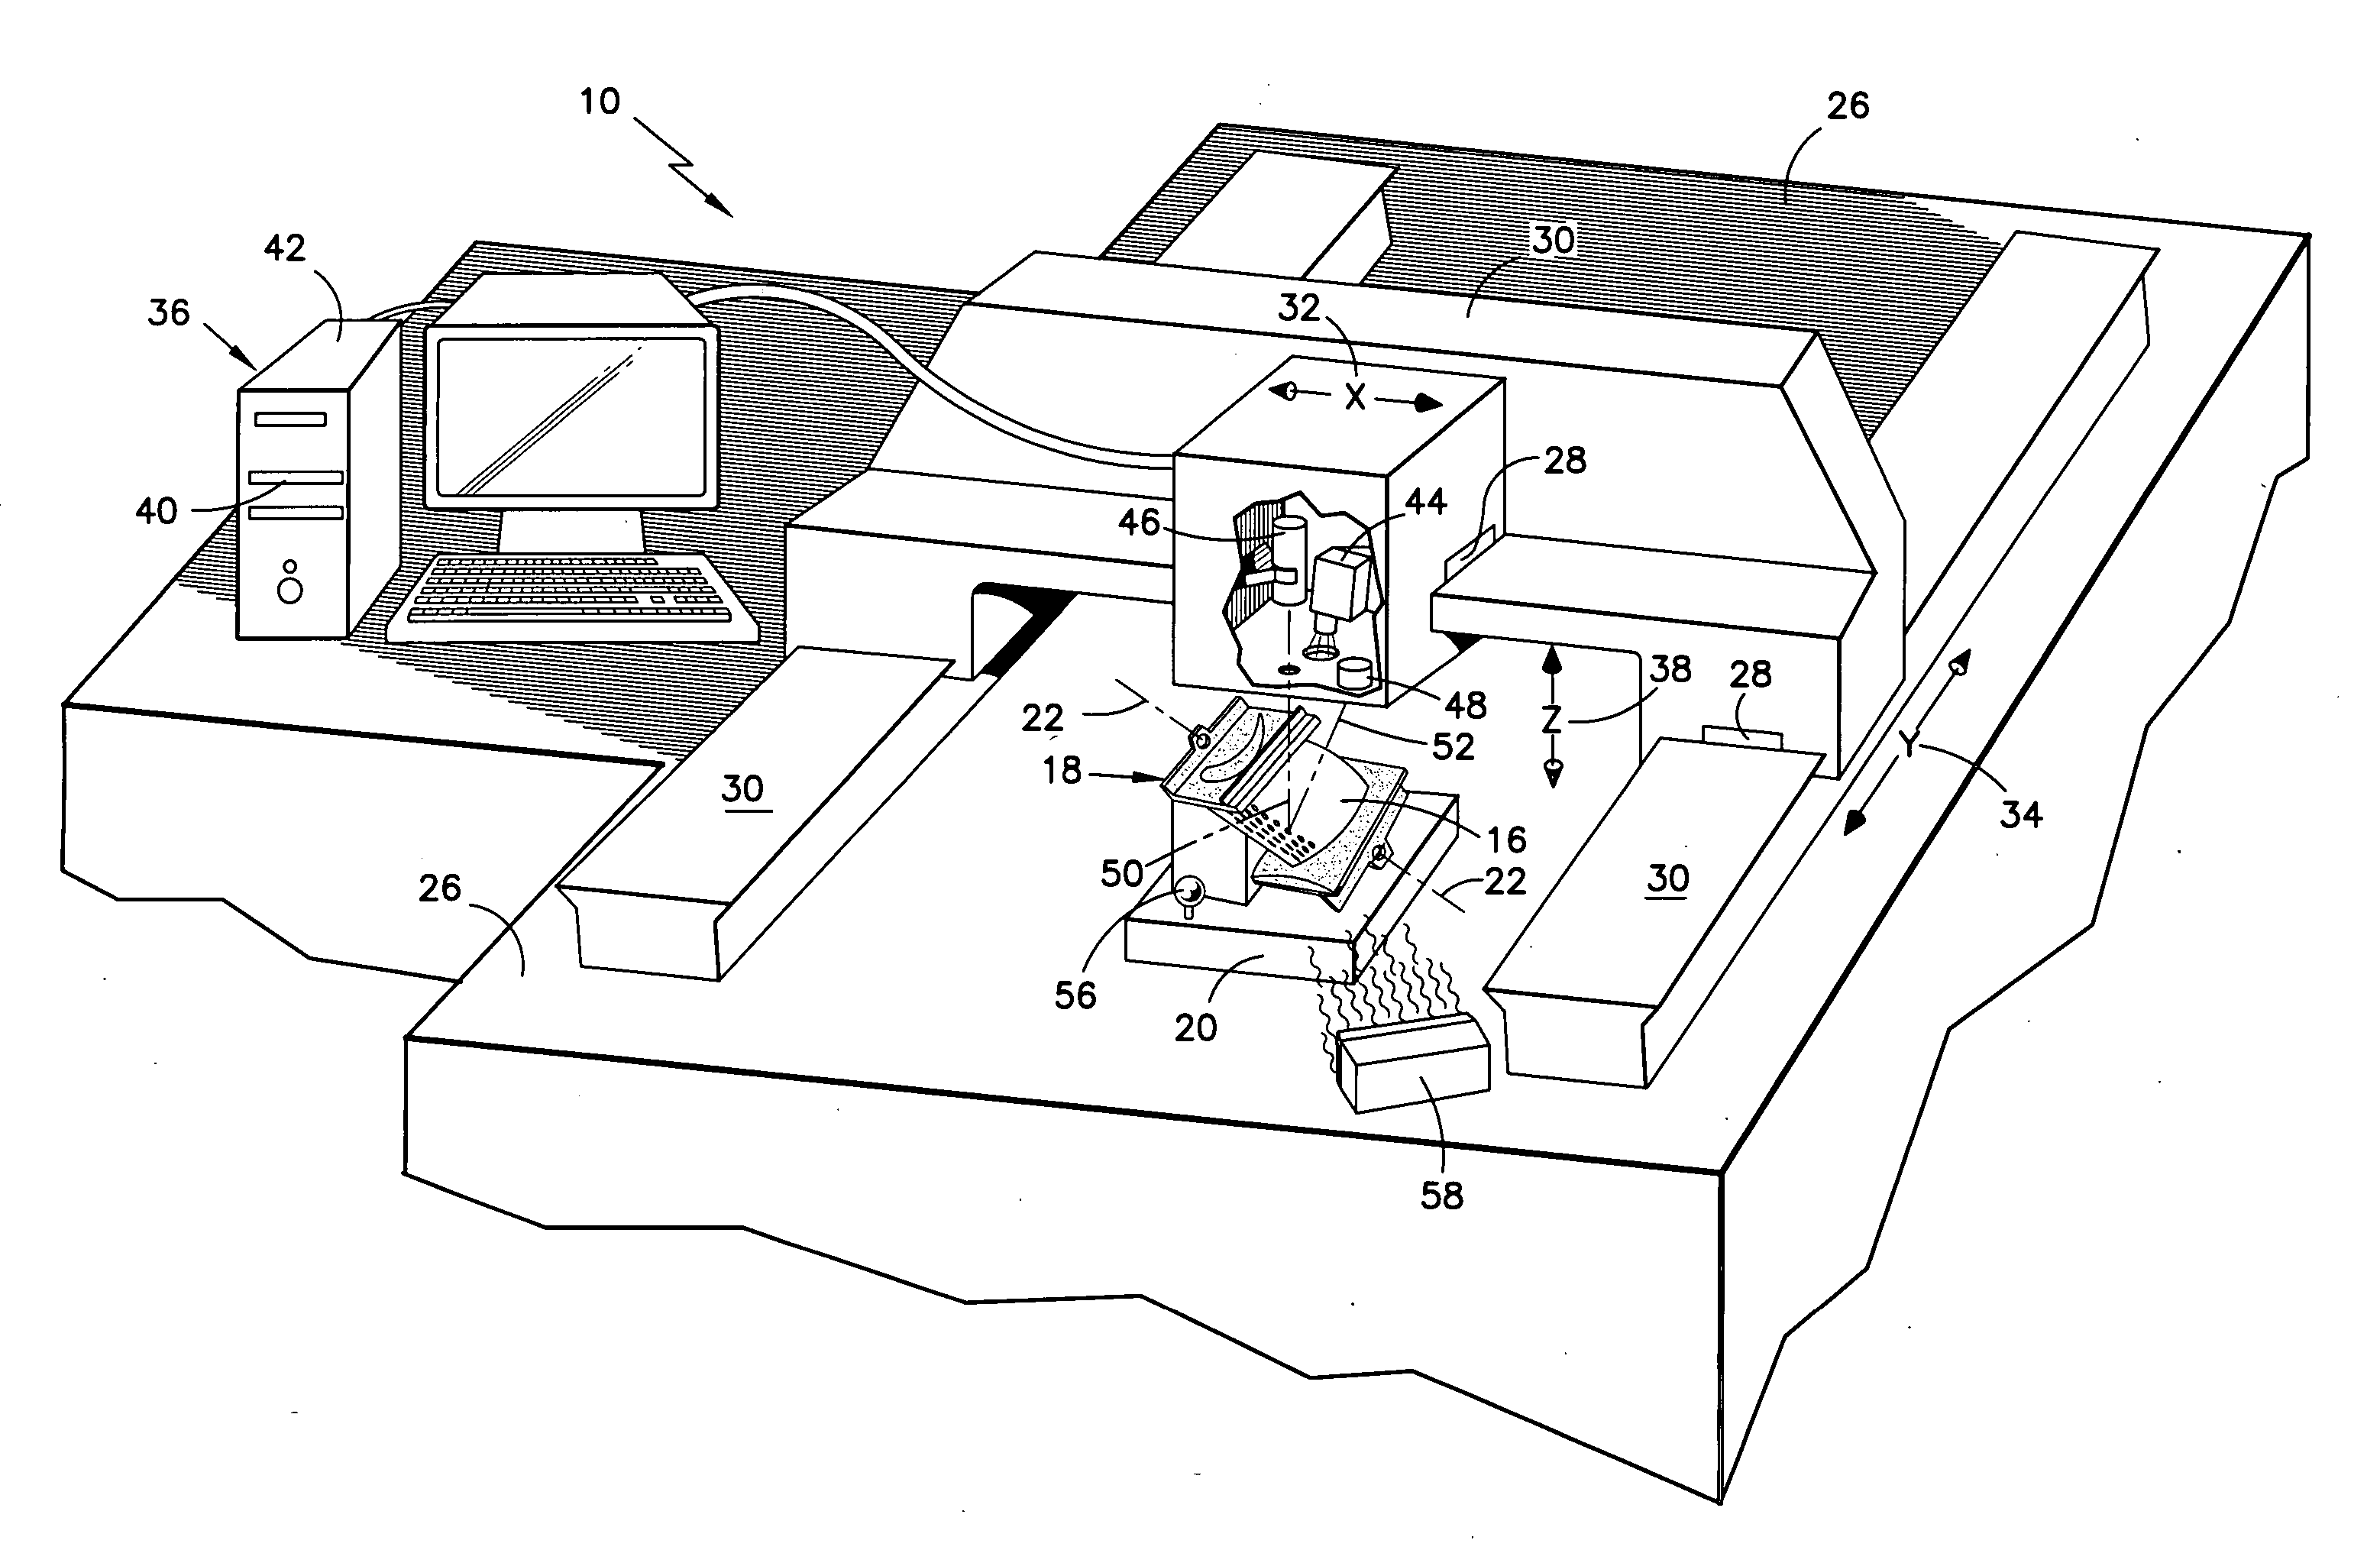 Thermal imaging and laser scanning systems and methods for determining the location and angular orientation of a hole with an obstructed opening residing on a surface of an article